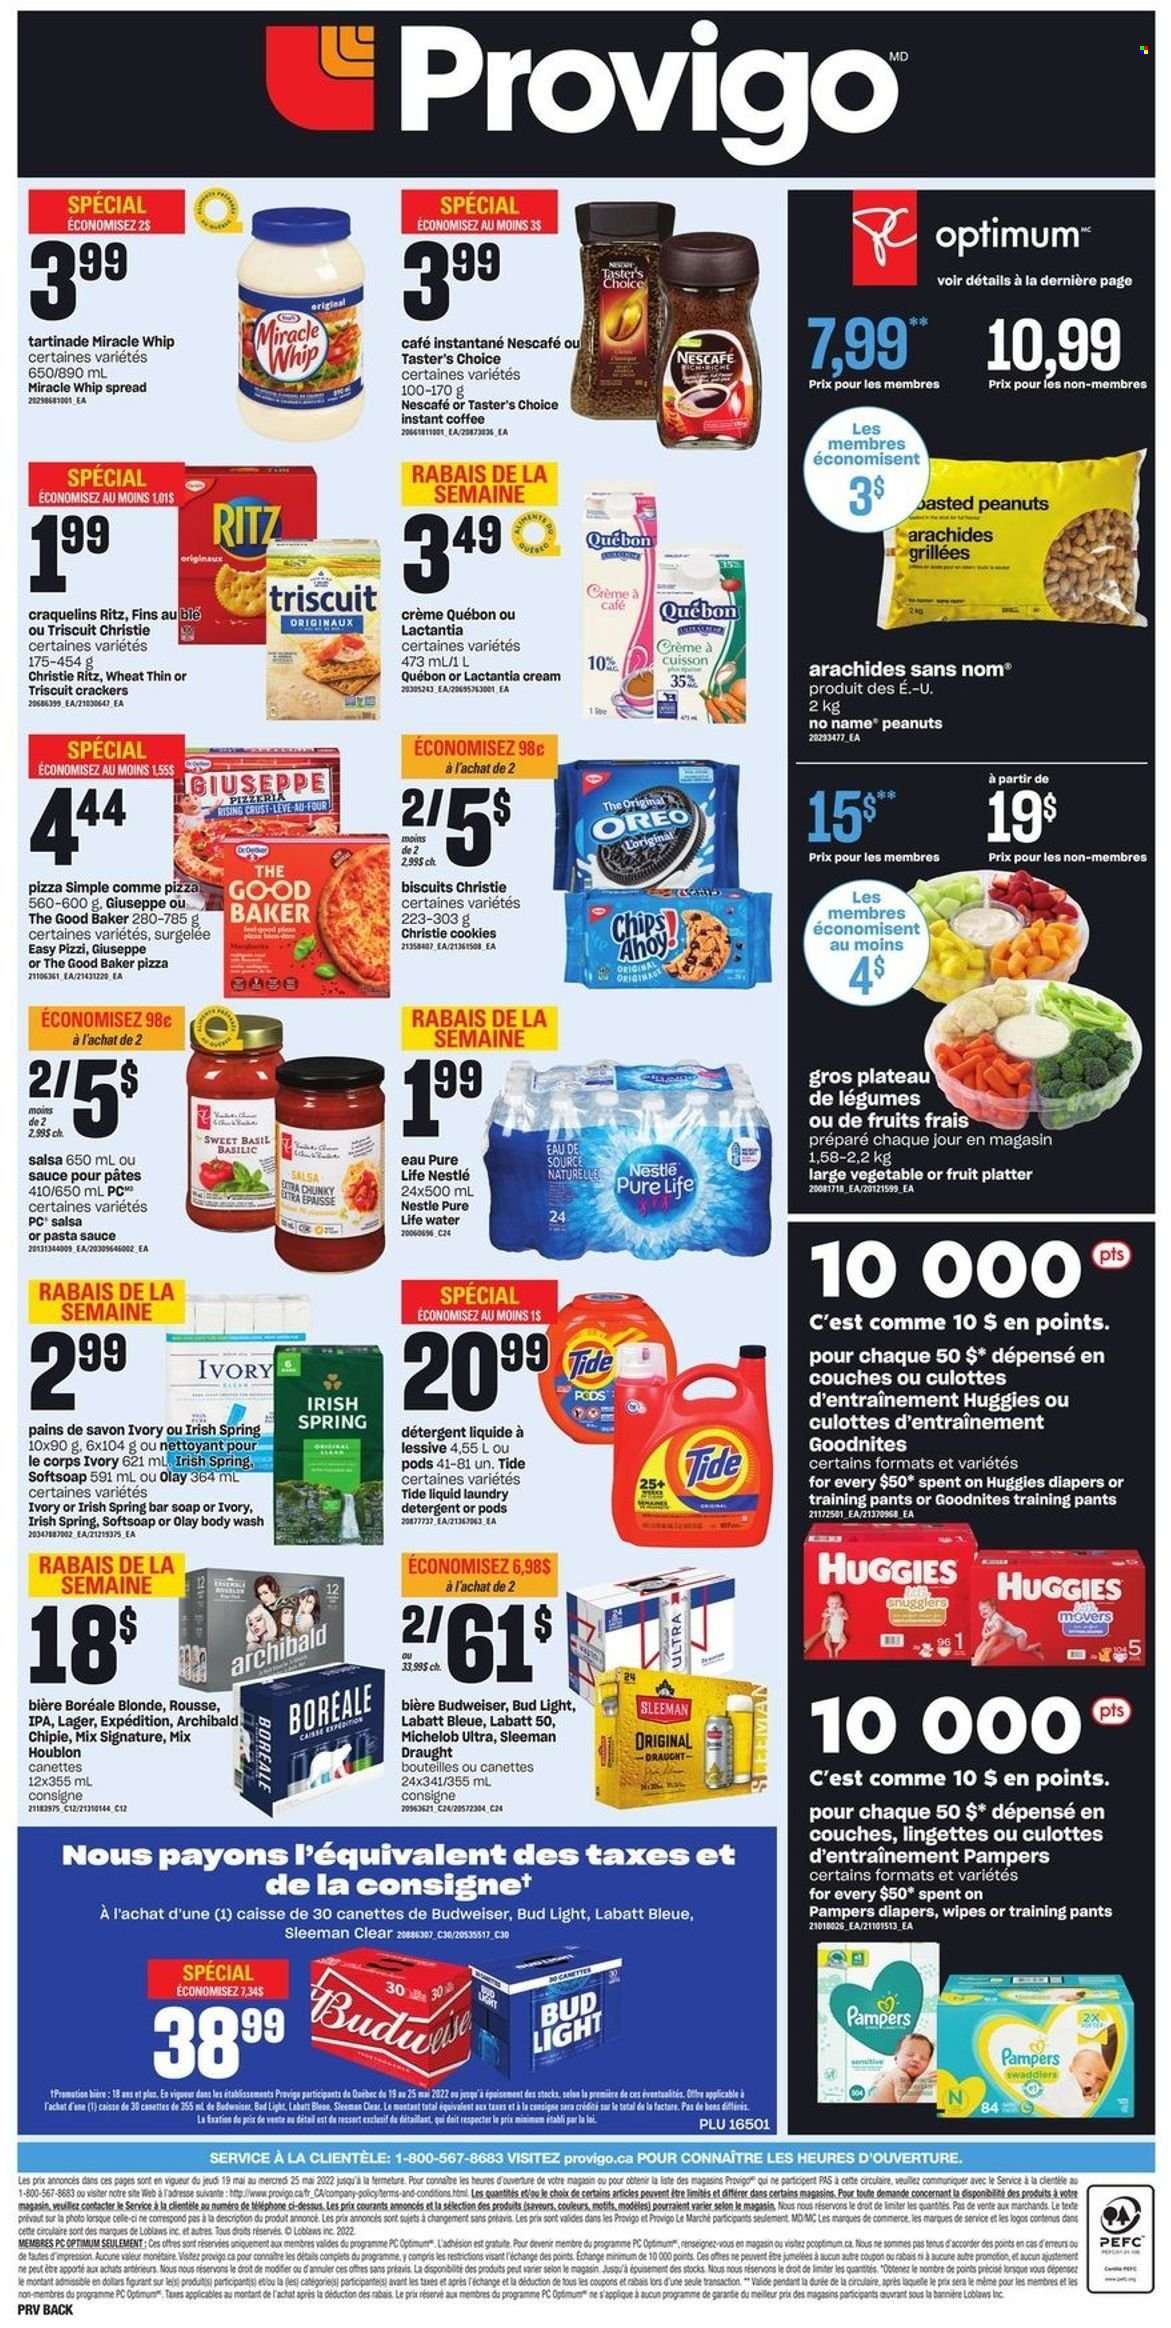 thumbnail - Provigo Flyer - May 19, 2022 - May 25, 2022 - Sales products - No Name, pizza, pasta sauce, sauce, Miracle Whip, cookies, crackers, biscuit, RITZ, chips, esponja, salsa, peanuts, Pure Life Water, instant coffee, beer, Bud Light, Lager, IPA, wipes, pants, nappies, baby pants, Tide, laundry detergent, body wash, Softsoap, soap bar, soap, Olay, Budweiser, detergent, Nestlé, Huggies, Pampers, Oreo, Nescafé, Michelob. Page 2.